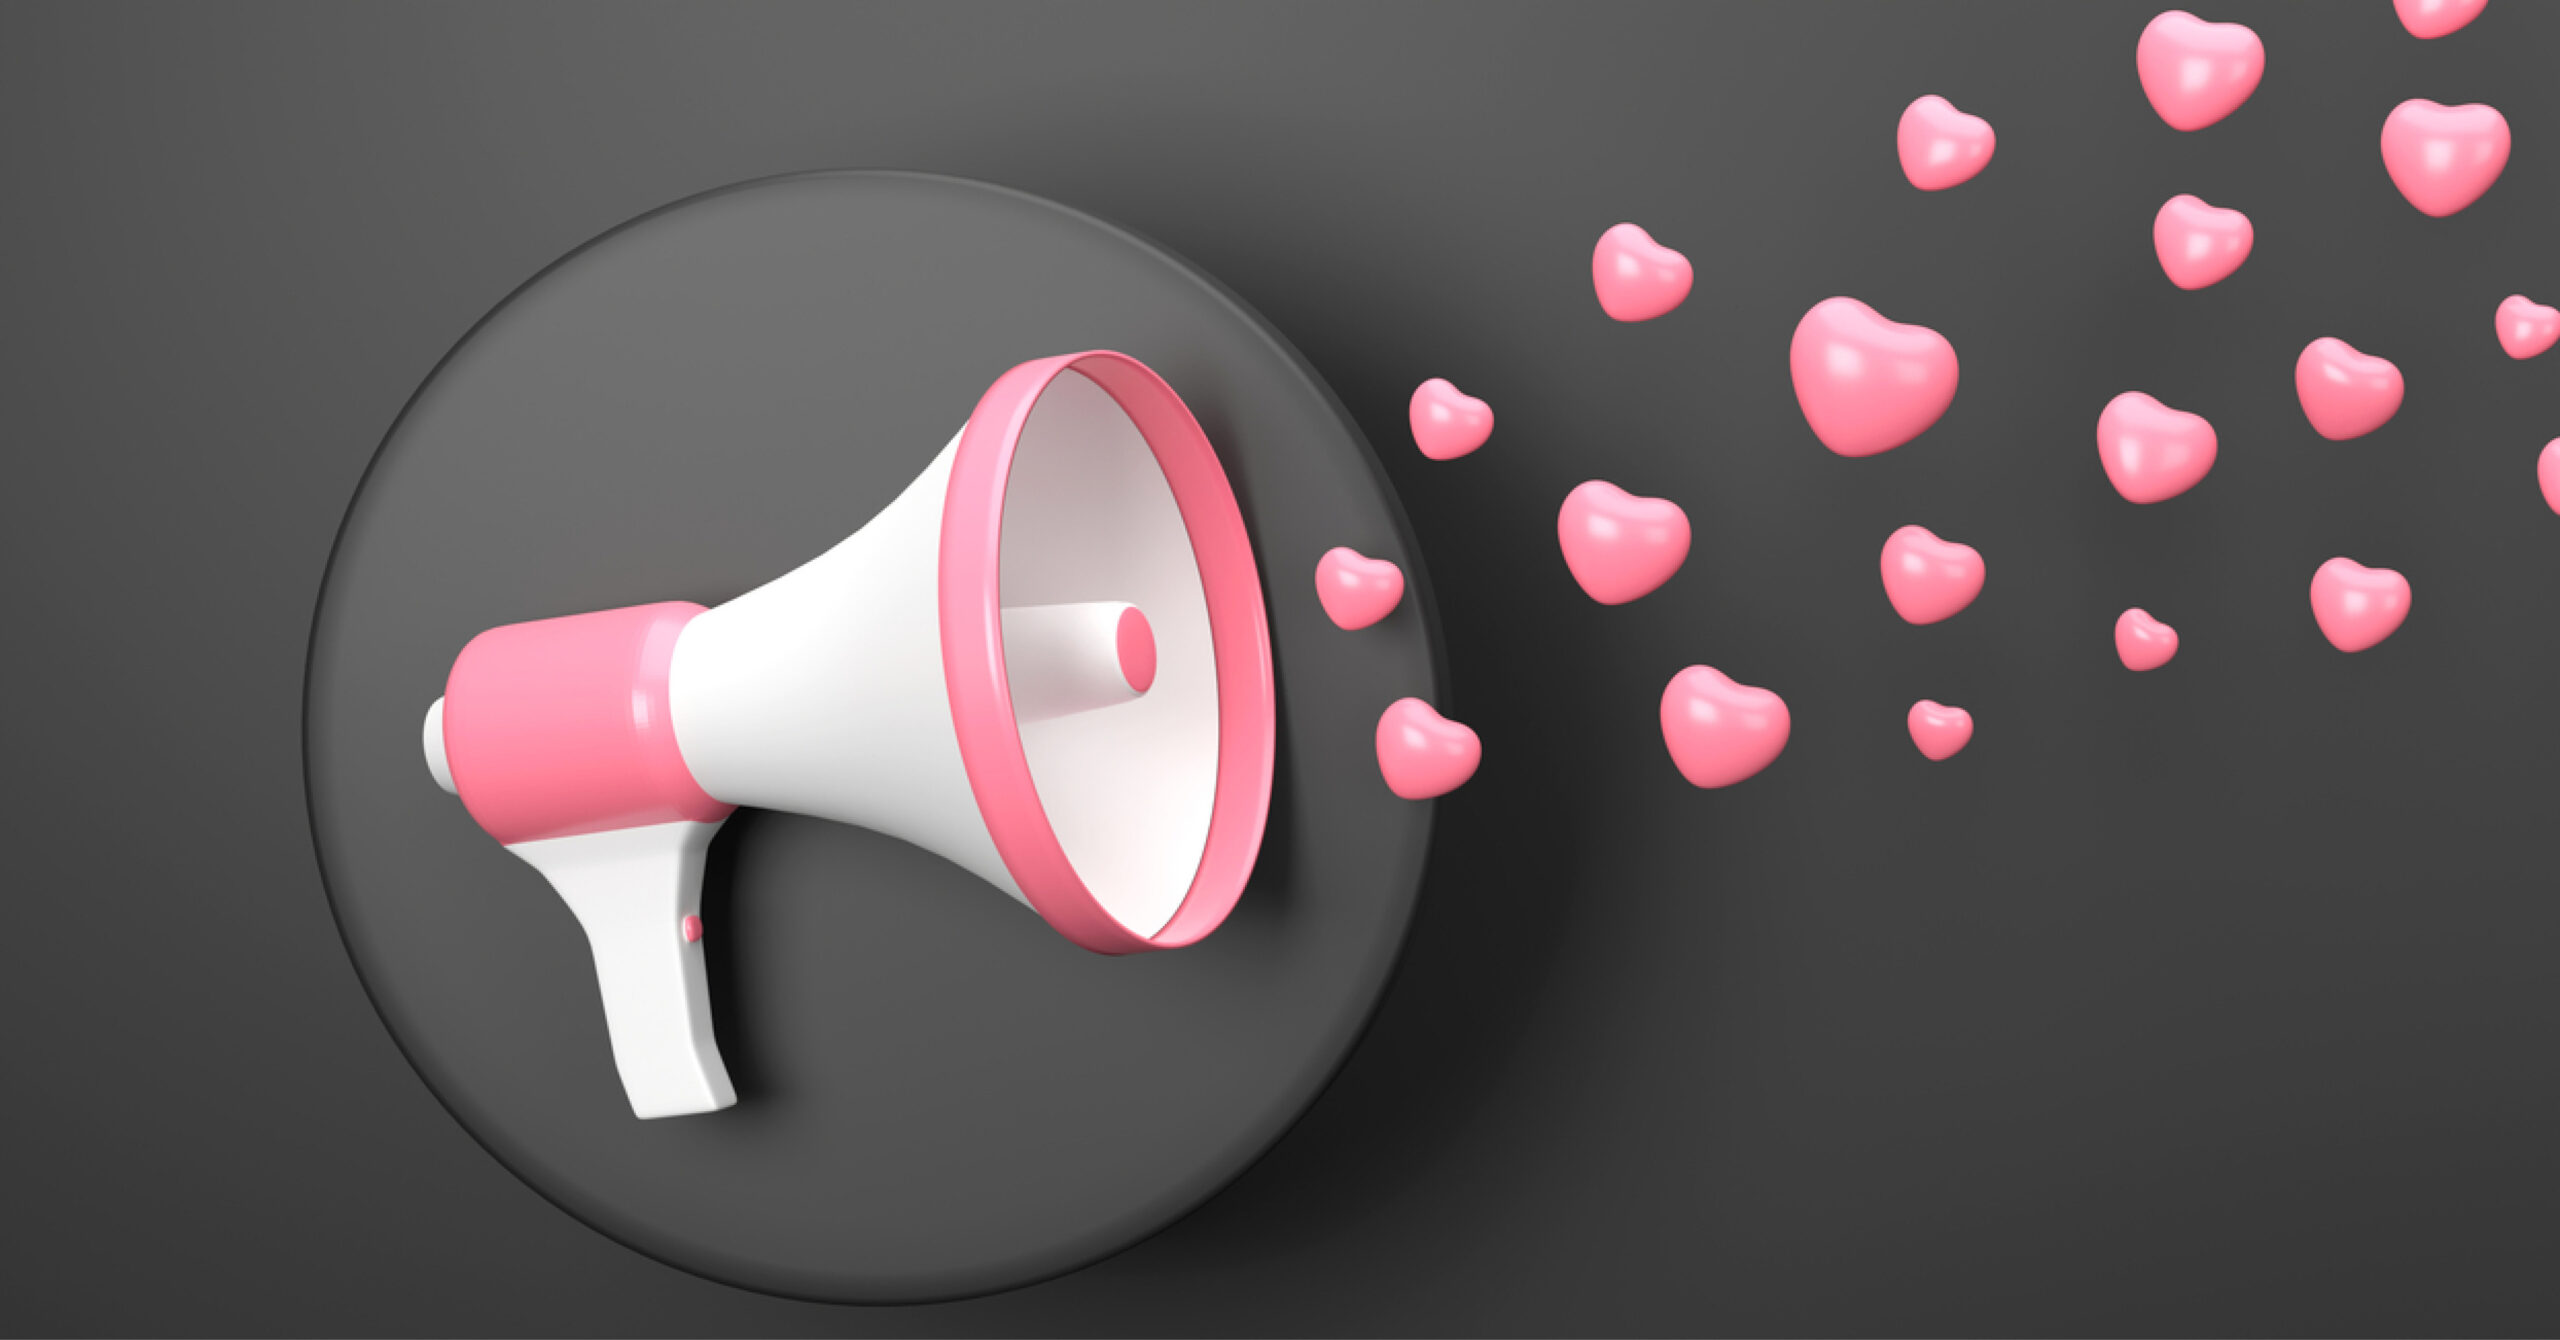 How To Market Your Business In Anticipation Of Valentine’s Day